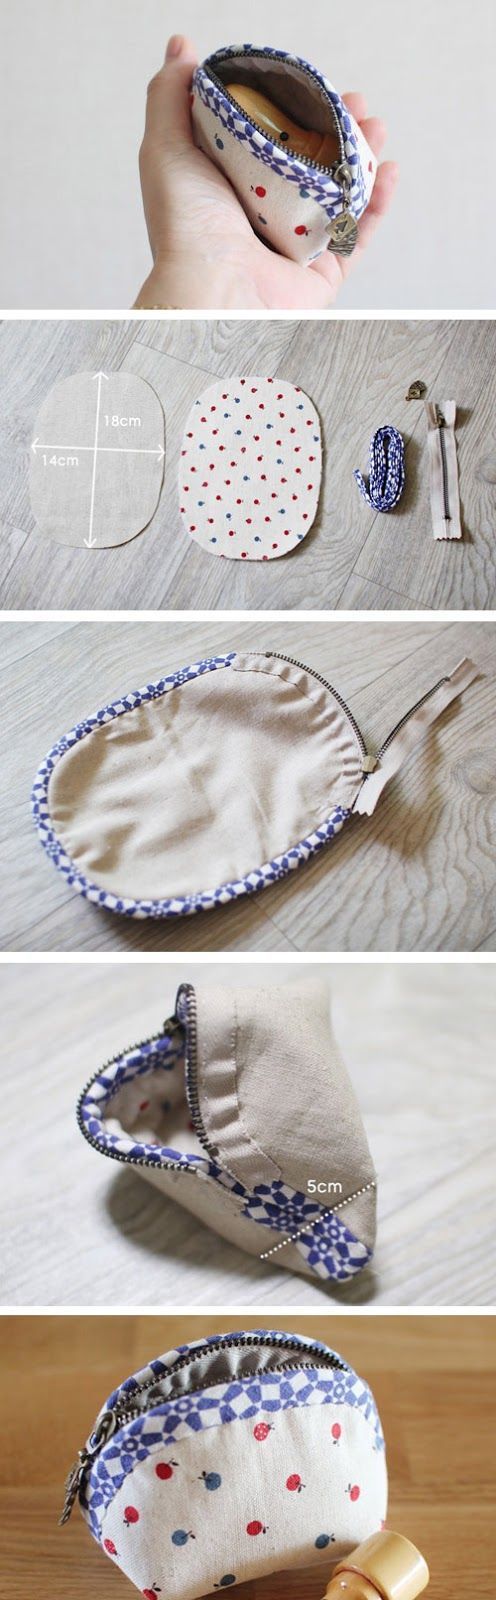 Rounded Zipper Pouch – Sewing Pattern  case, coin purse, DIY www.handma